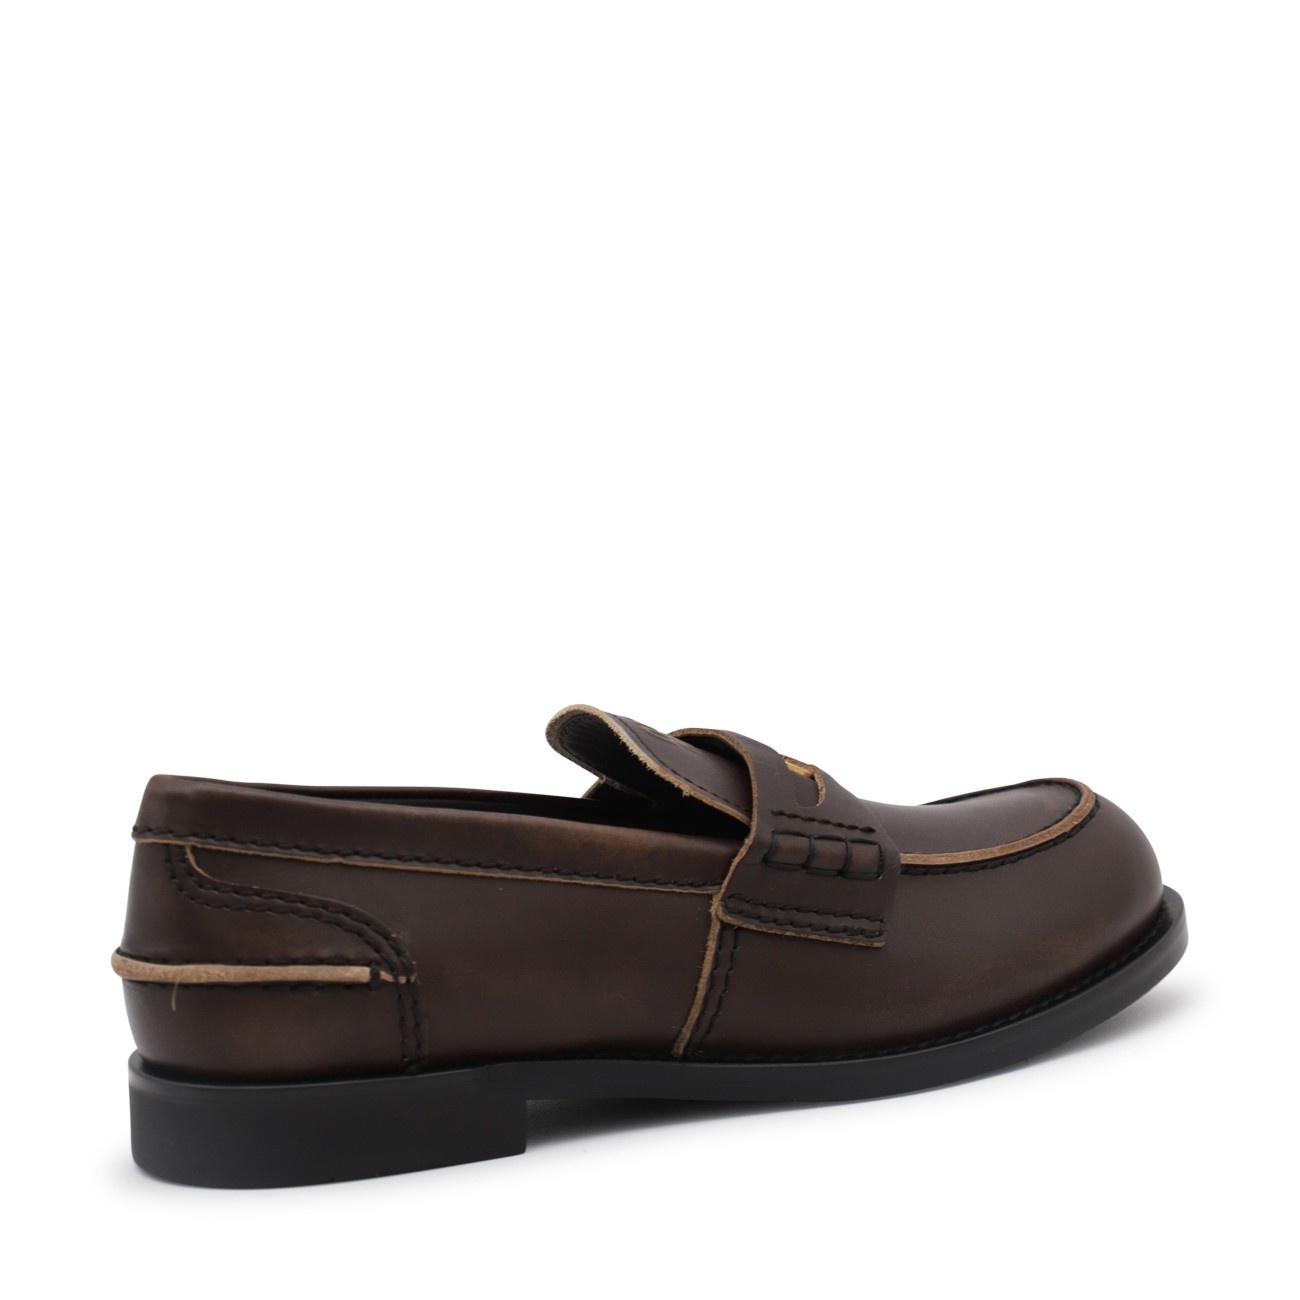 brown leather loafers - 4